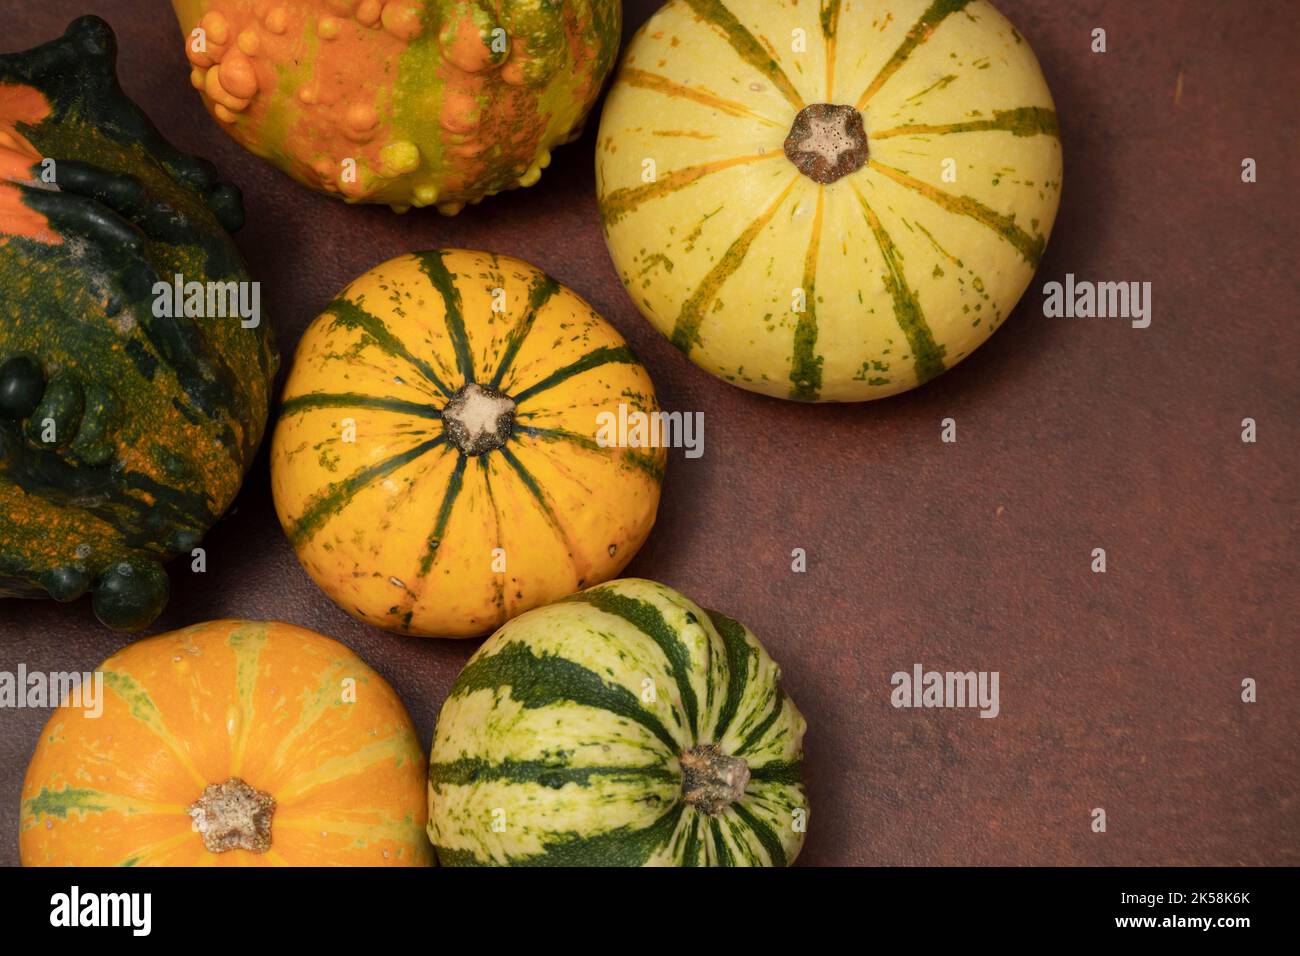 Small pumpkins on an oxide background Stock Photo